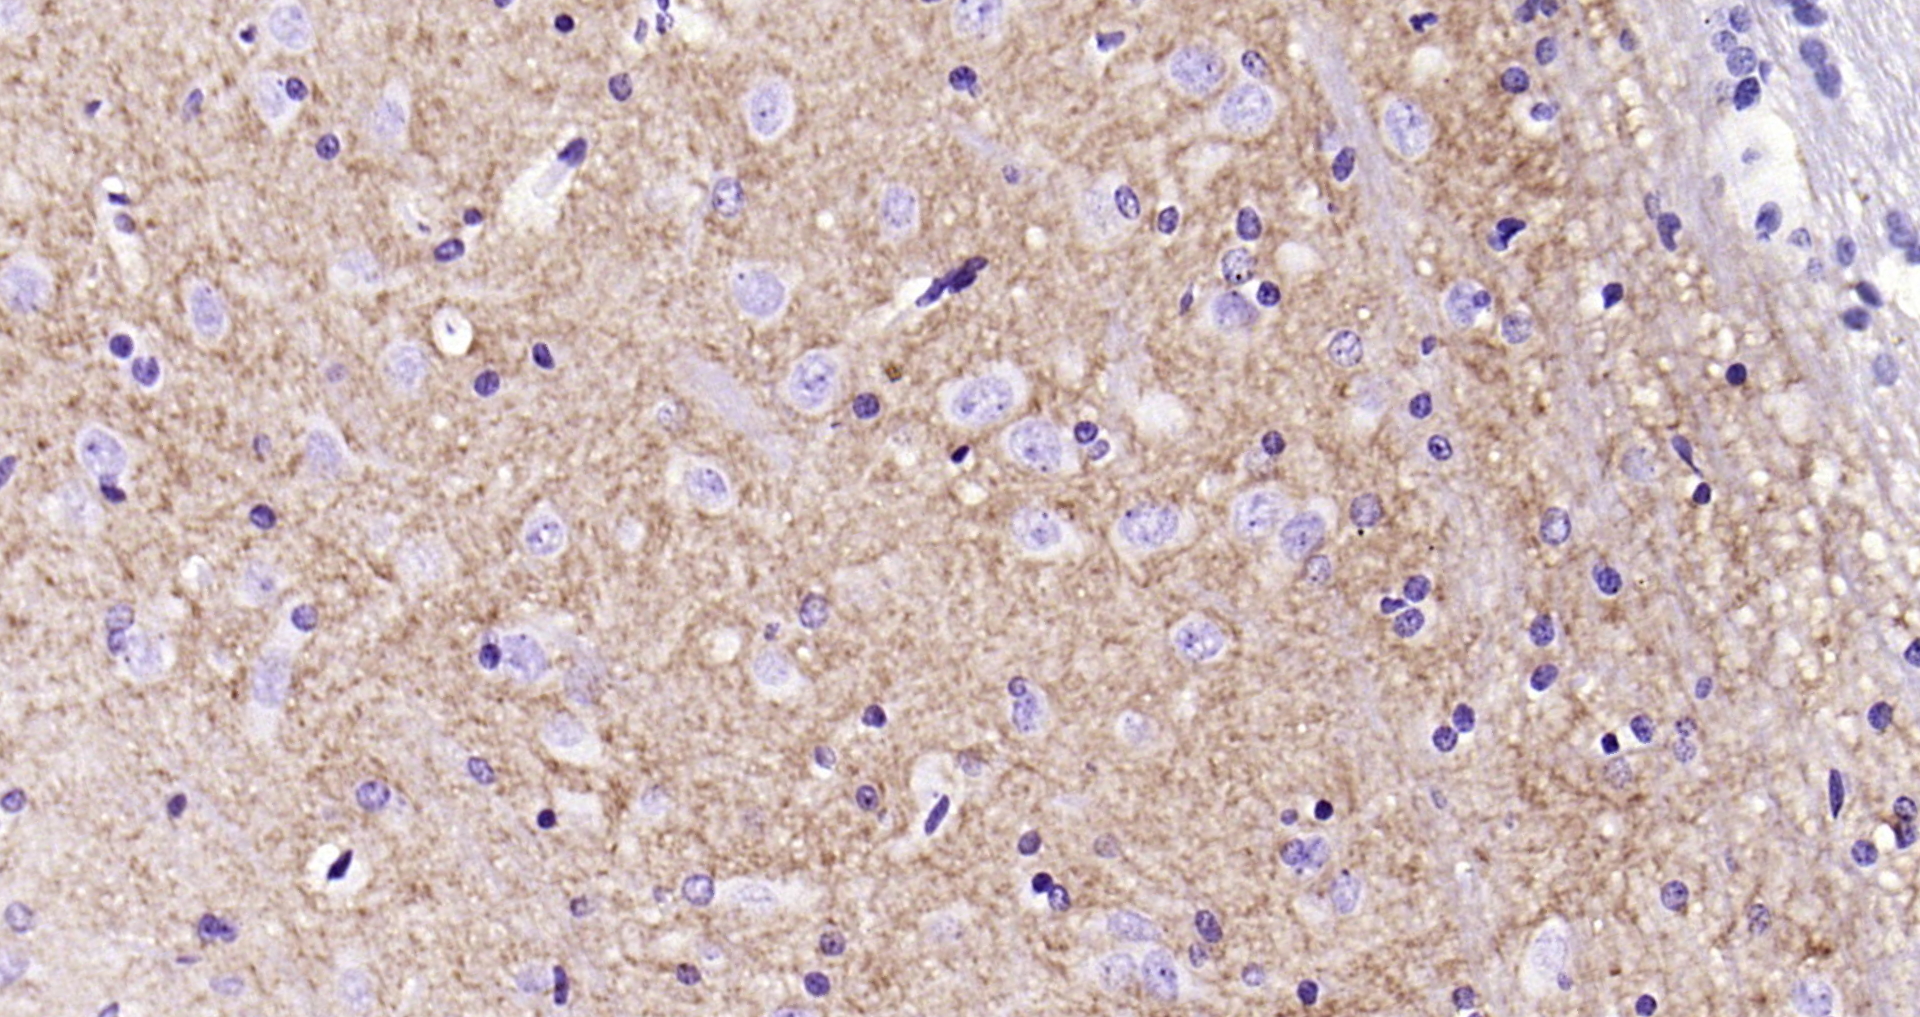 Paraformaldehyde-fixed, paraffin embedded Rat brain; Antigen retrieval by boiling in sodium citrate buffer (pH6.0) for 15min; Block endogenous peroxidase by 3% hydrogen peroxide for 20 minutes; Blocking buffer (normal goat serum) at 37°C for 30min; Antibody incubation with H Cadherin Monoclonal Antibody, Unconjugated (bsm-54321R) at 1:200 overnight at 4°C, DAB staining.